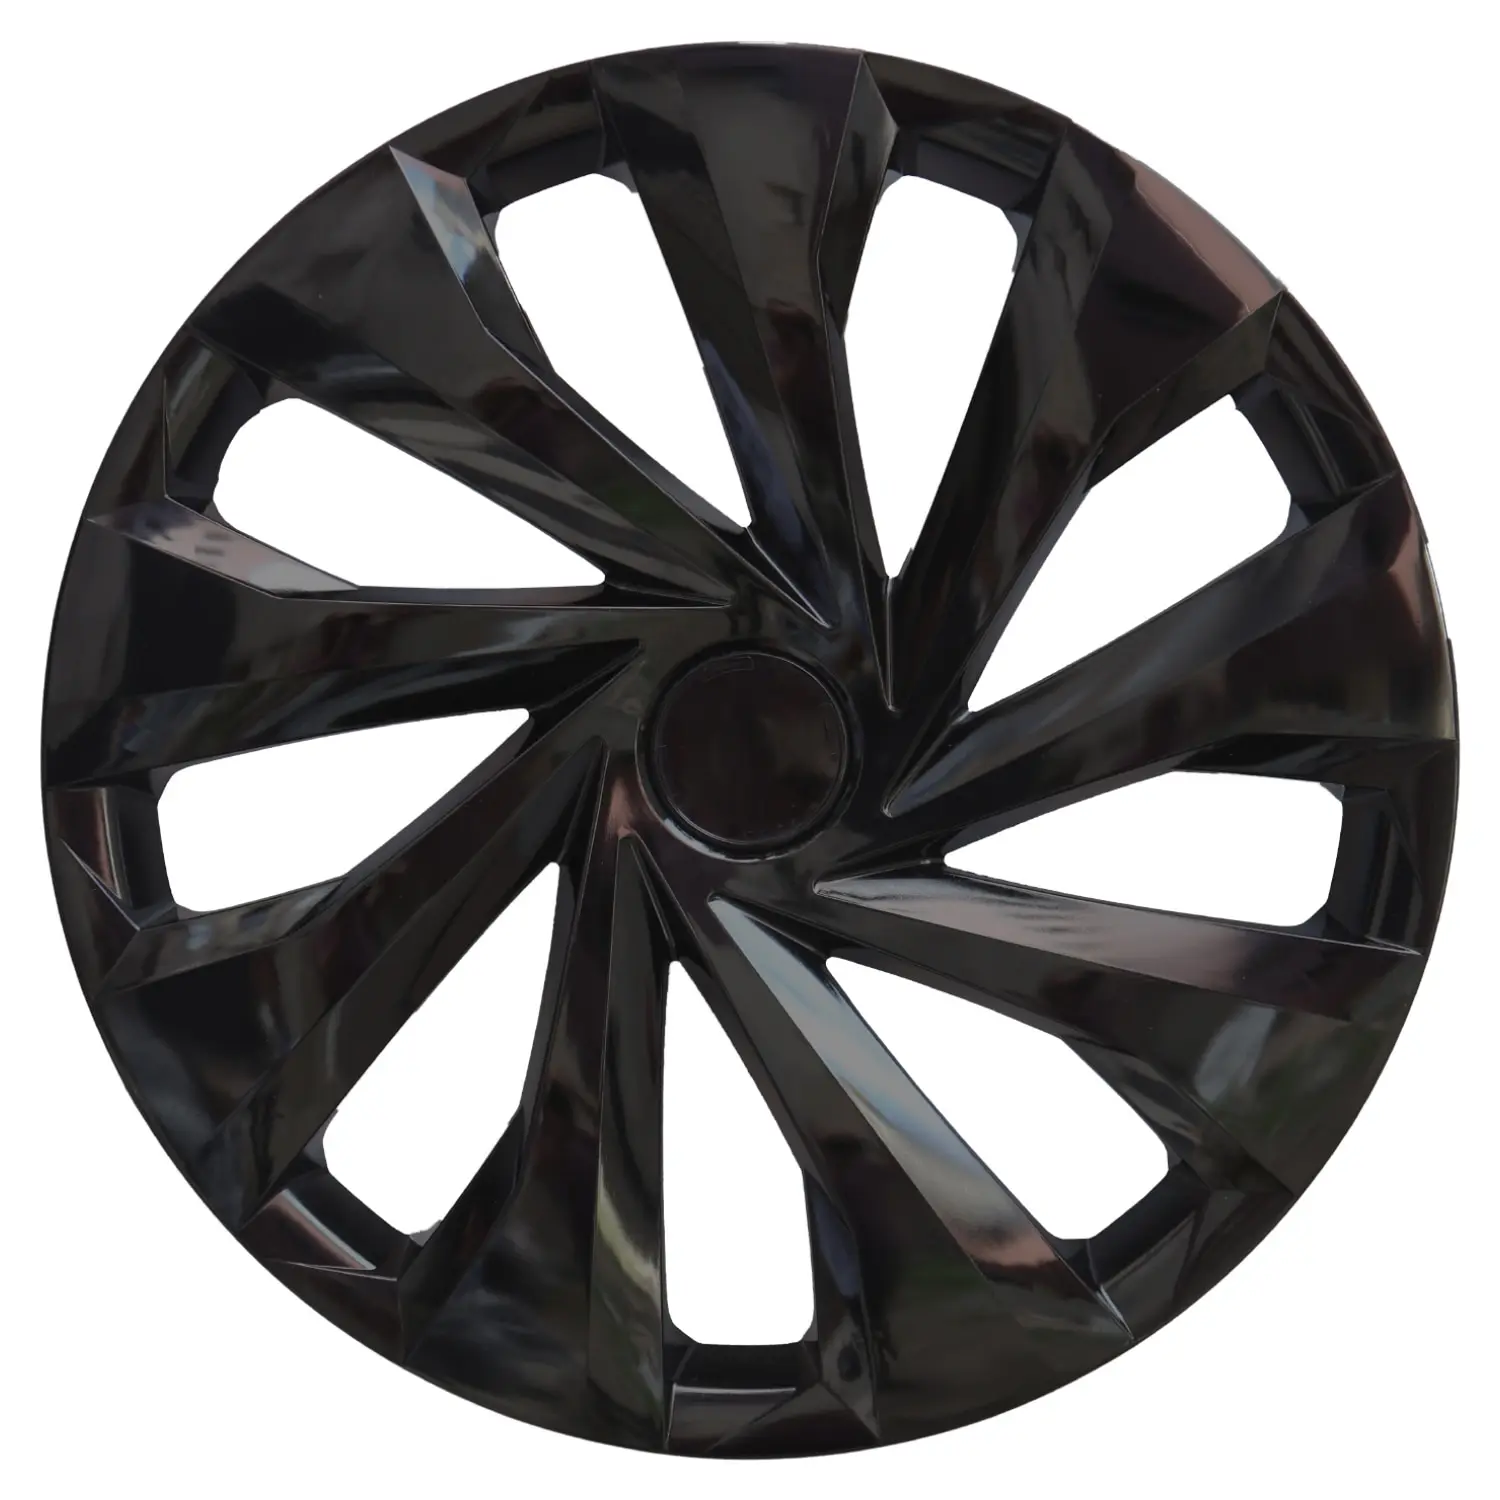 

4 PCS 14 inch 15 inch Logo Option Car Wheel Covers Black Unbreakable Hub Cover Spares Parts Turkey Production Wheel Cover